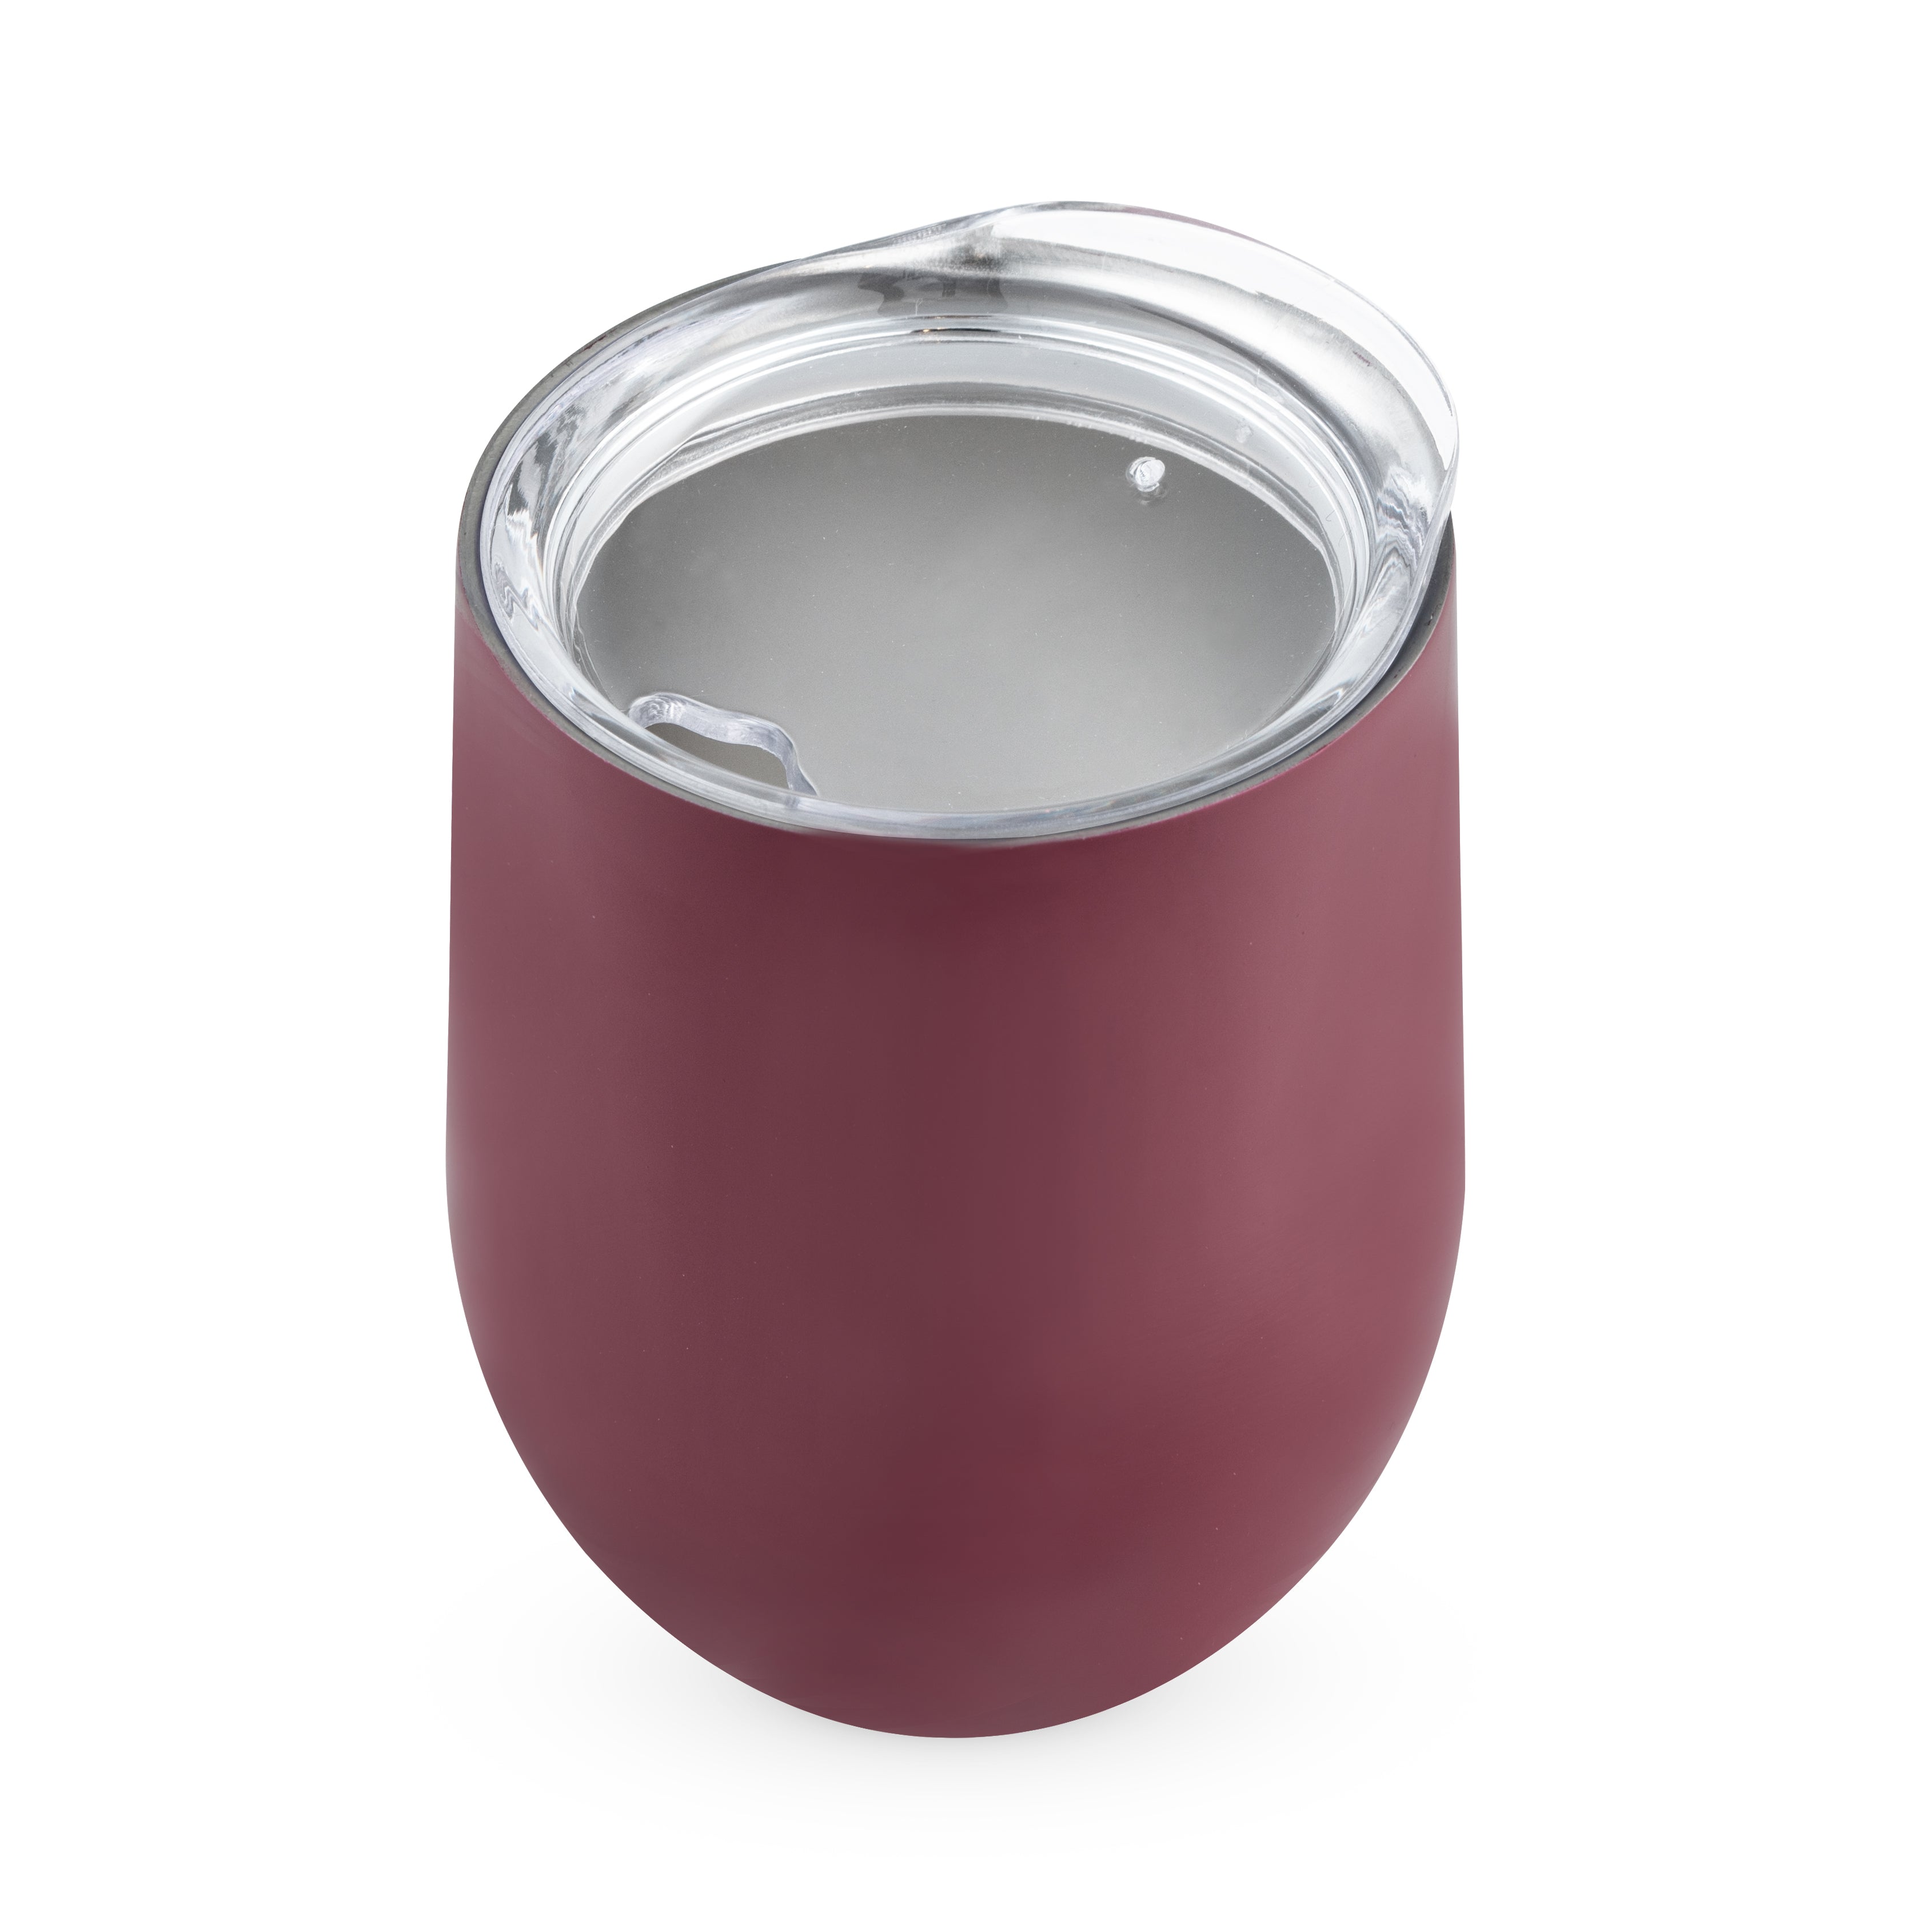 Sip & Go Stemless Wine Tumbler in Berry 